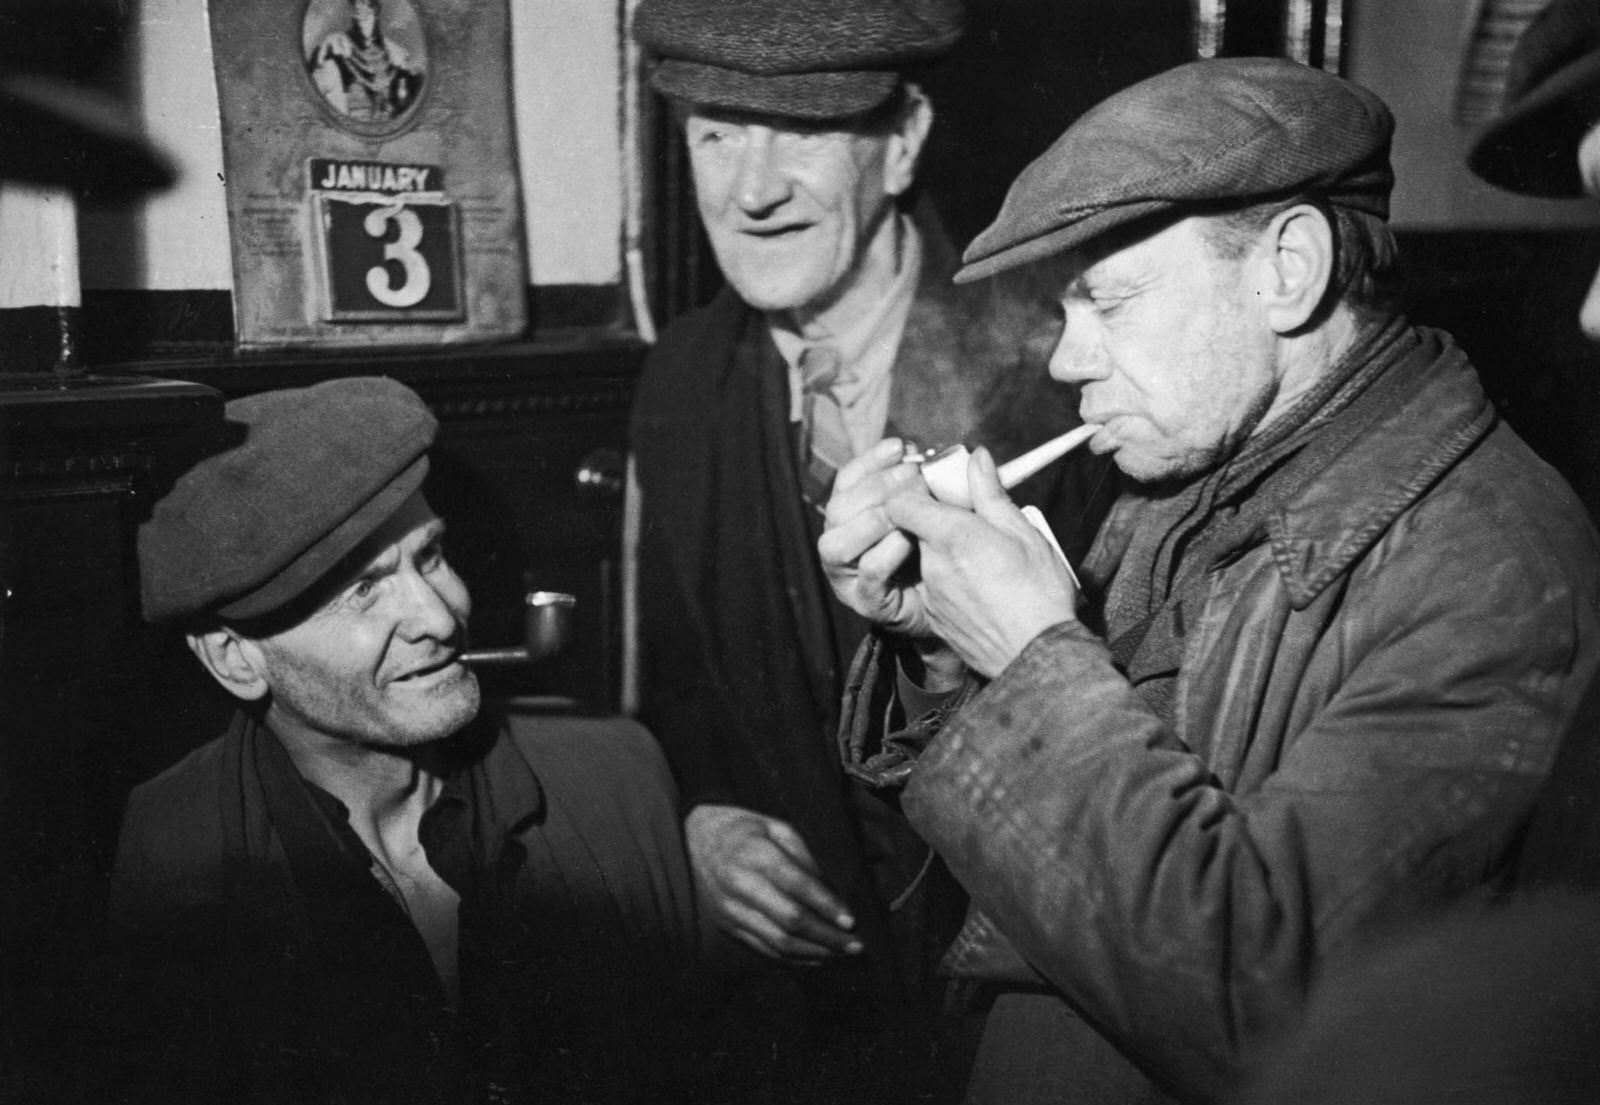 Men from the Gorbals, Glasgow's slum area, meet in the local pub for a friendly smoke, 3rd January 1948.